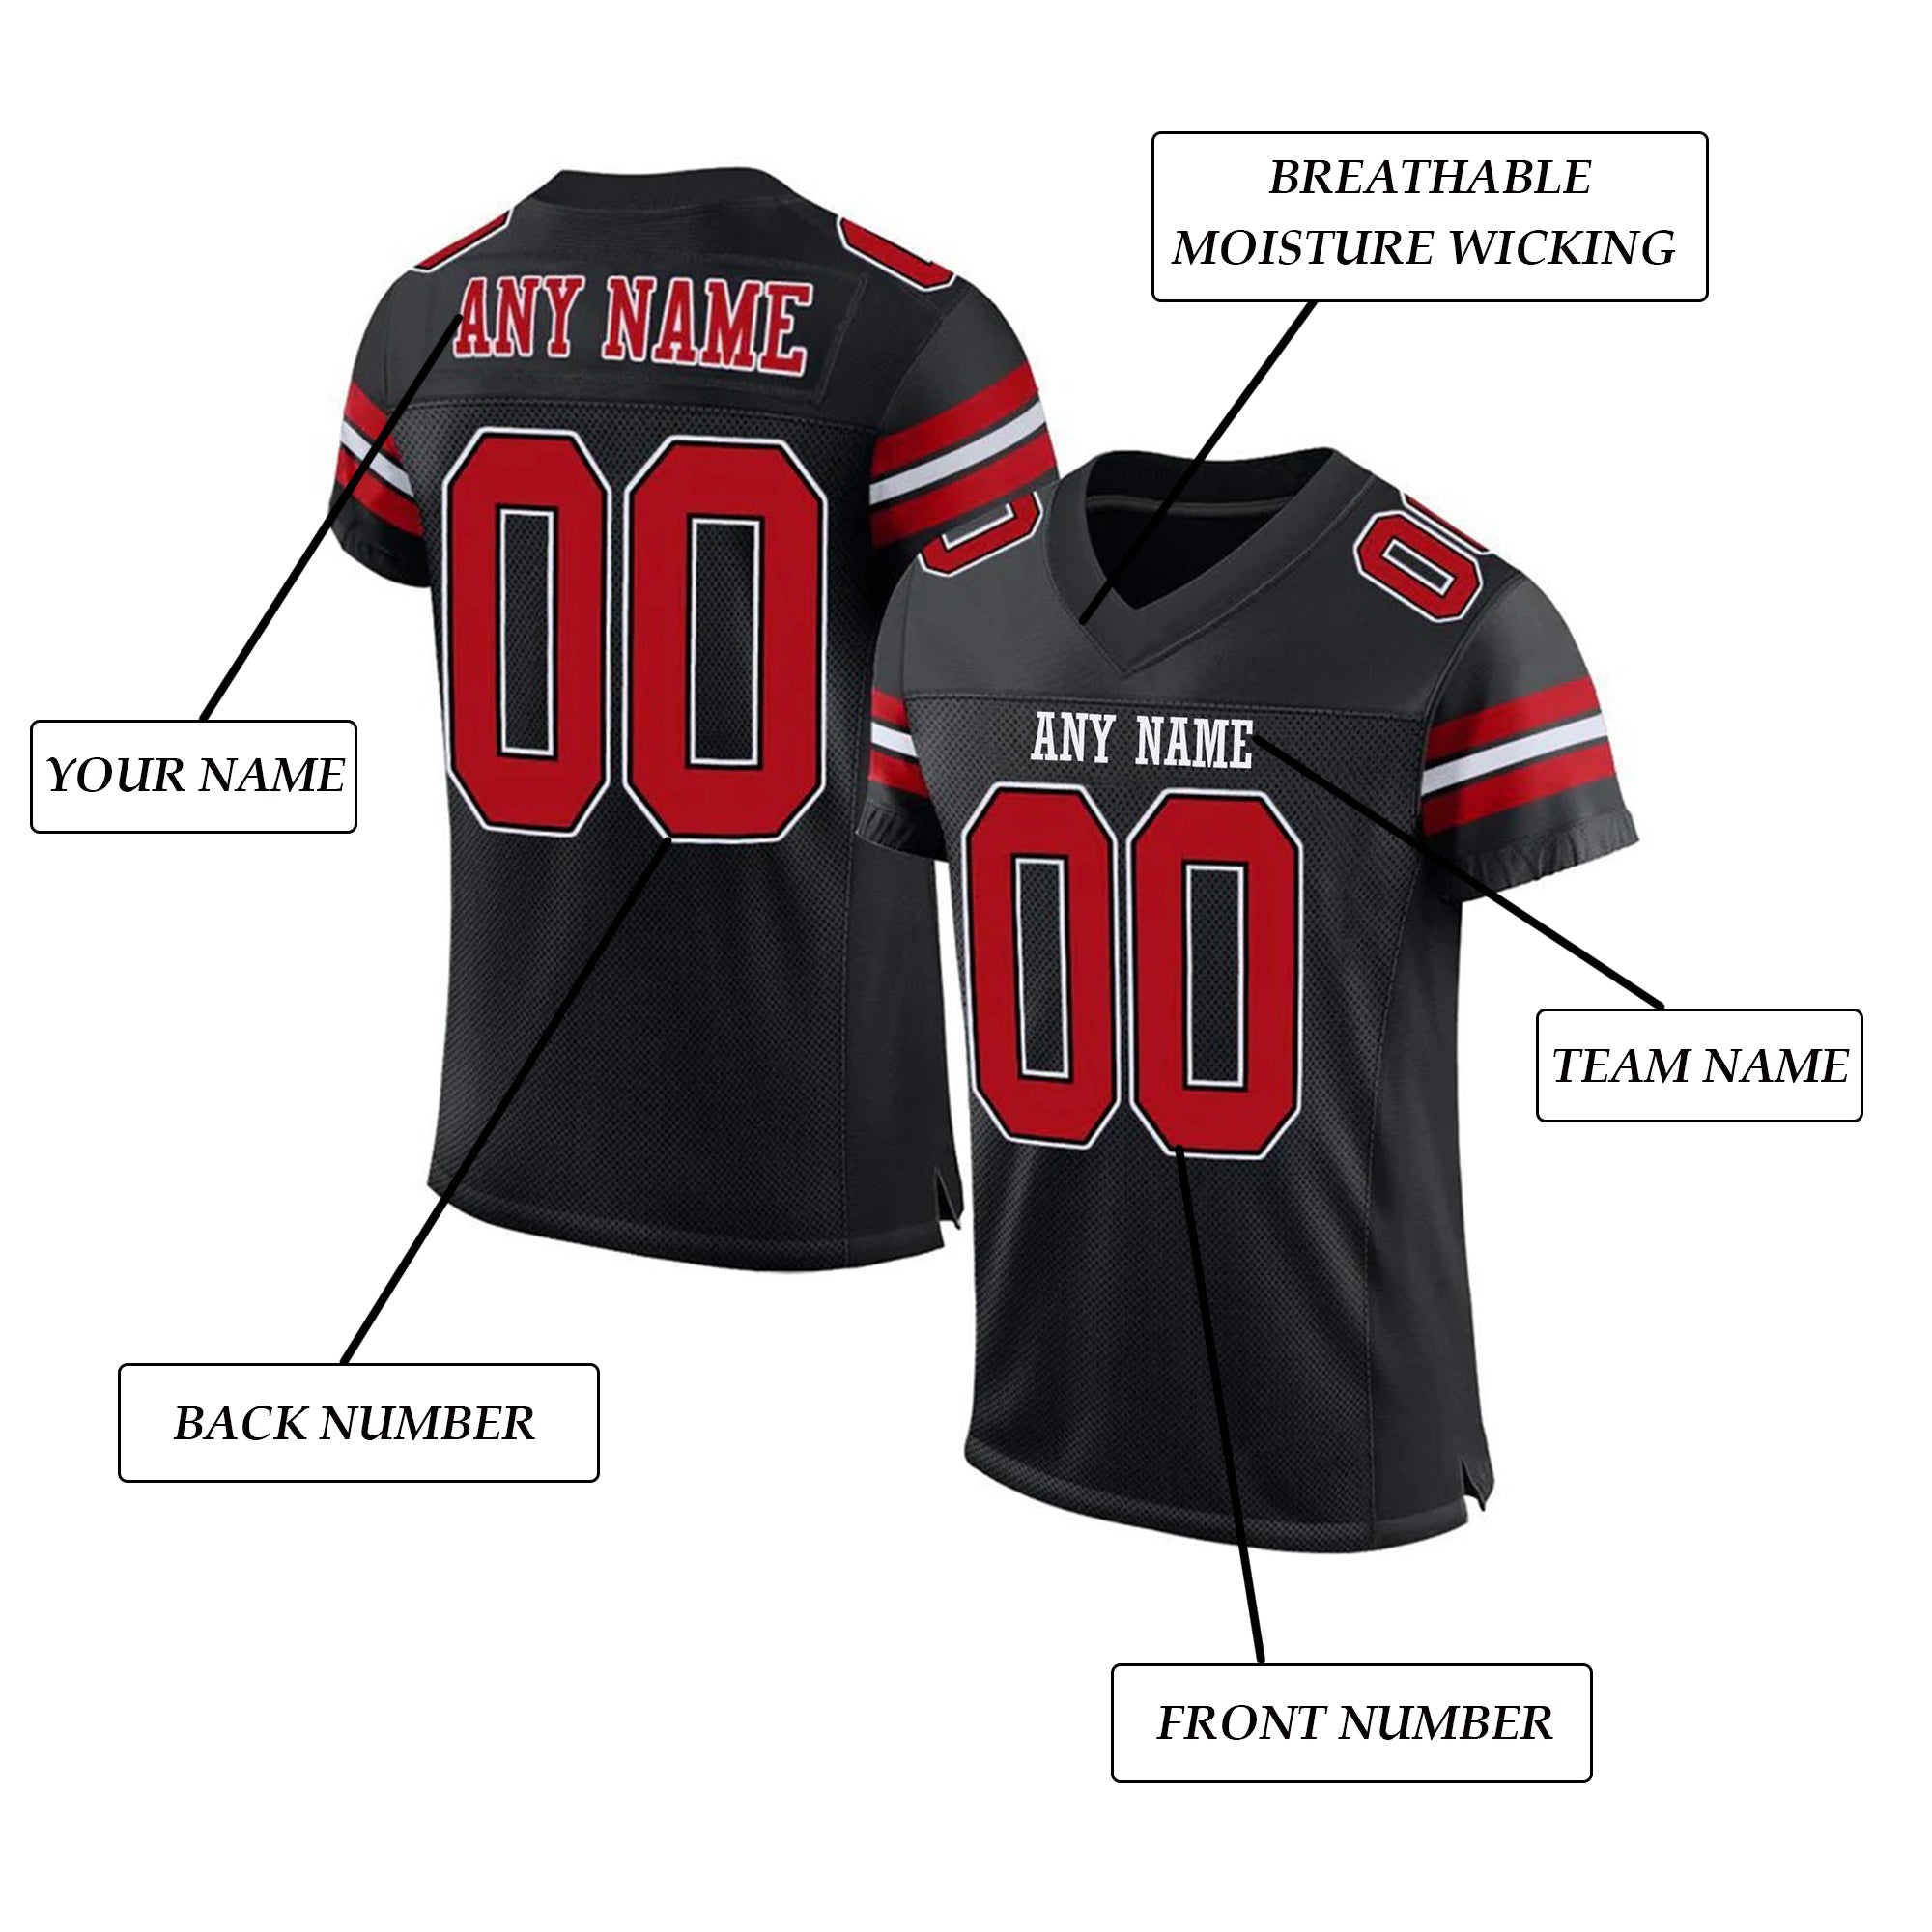 Custom Football Jersey Personalized Stitched/Printed Team Name & Number Sports Uniform for Men Women Youth